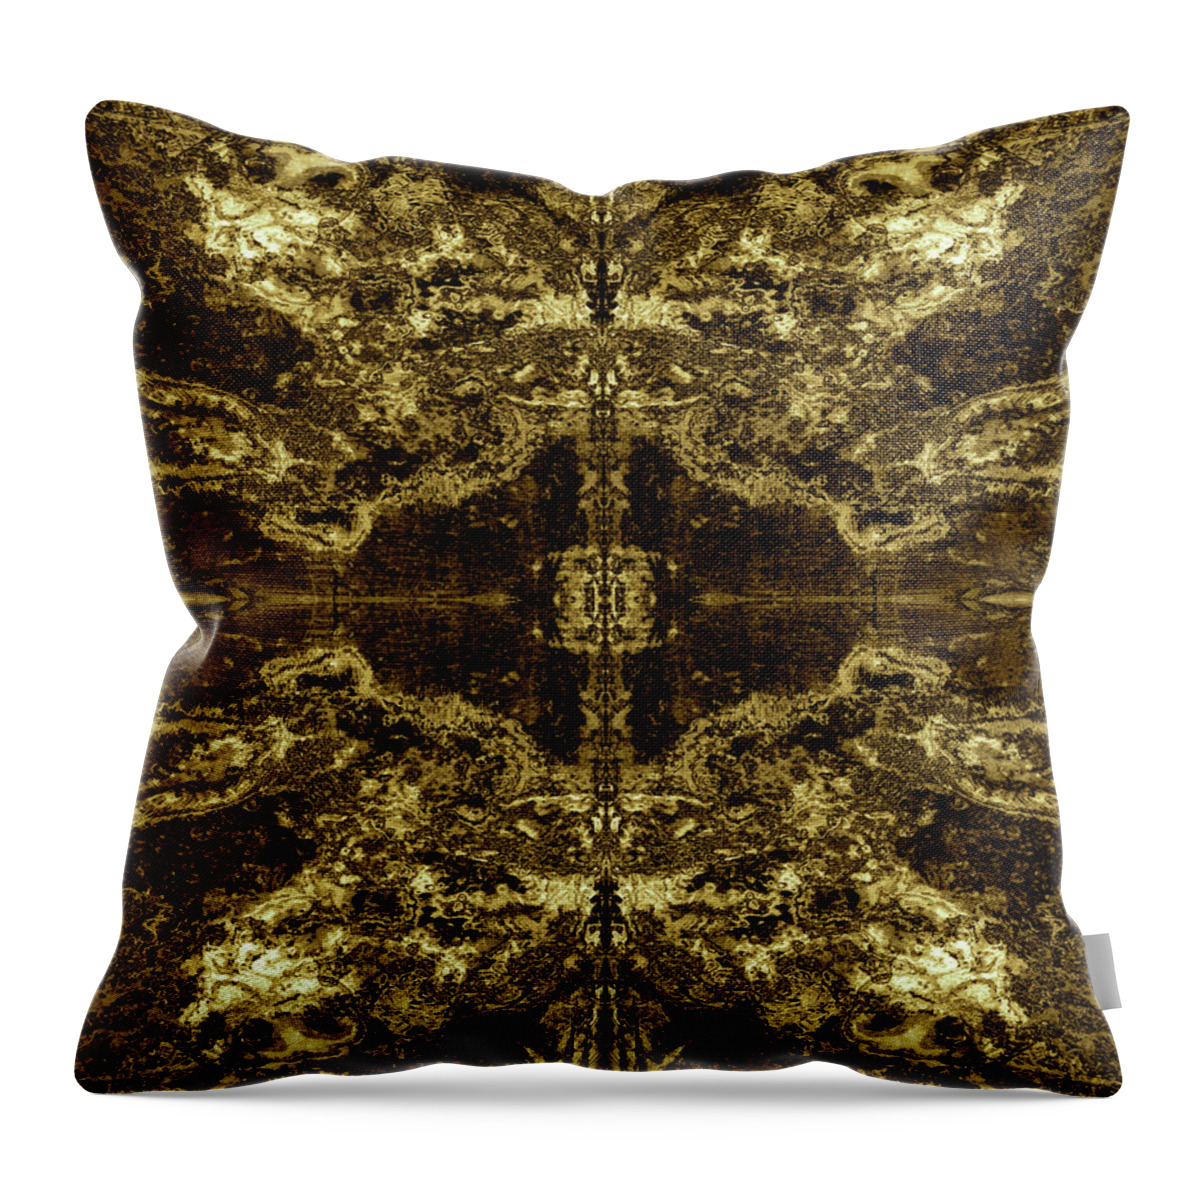 Abstract Throw Pillow featuring the digital art Tessellation No. 2 by David Gordon